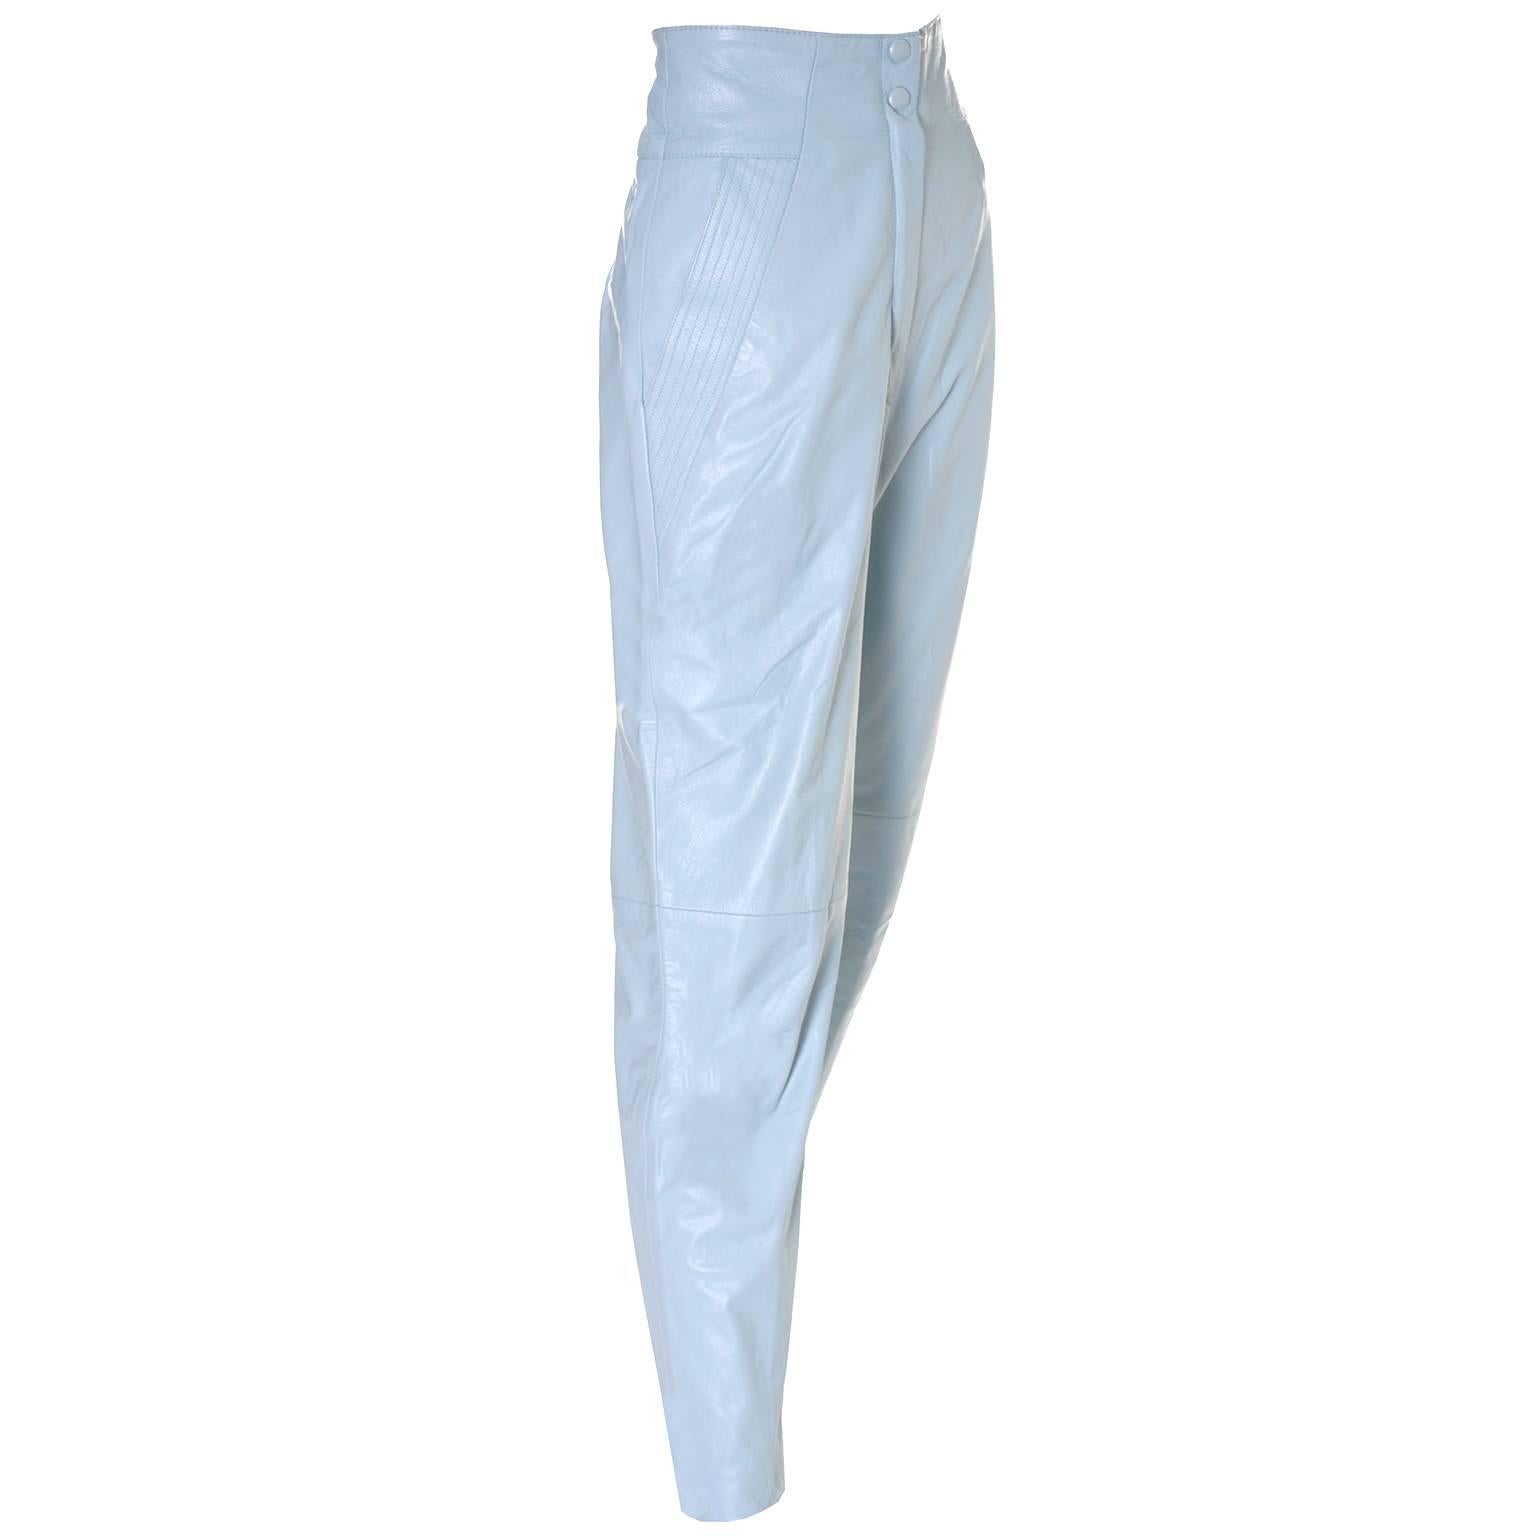 These great blue vintage Lillie Rubin leather pants were made in Israel in the 1980's. The pants are lined and have side slit pockets with nice top stitching detail and a front zipper and snap closure.  They fit like a cropped pant with really cool